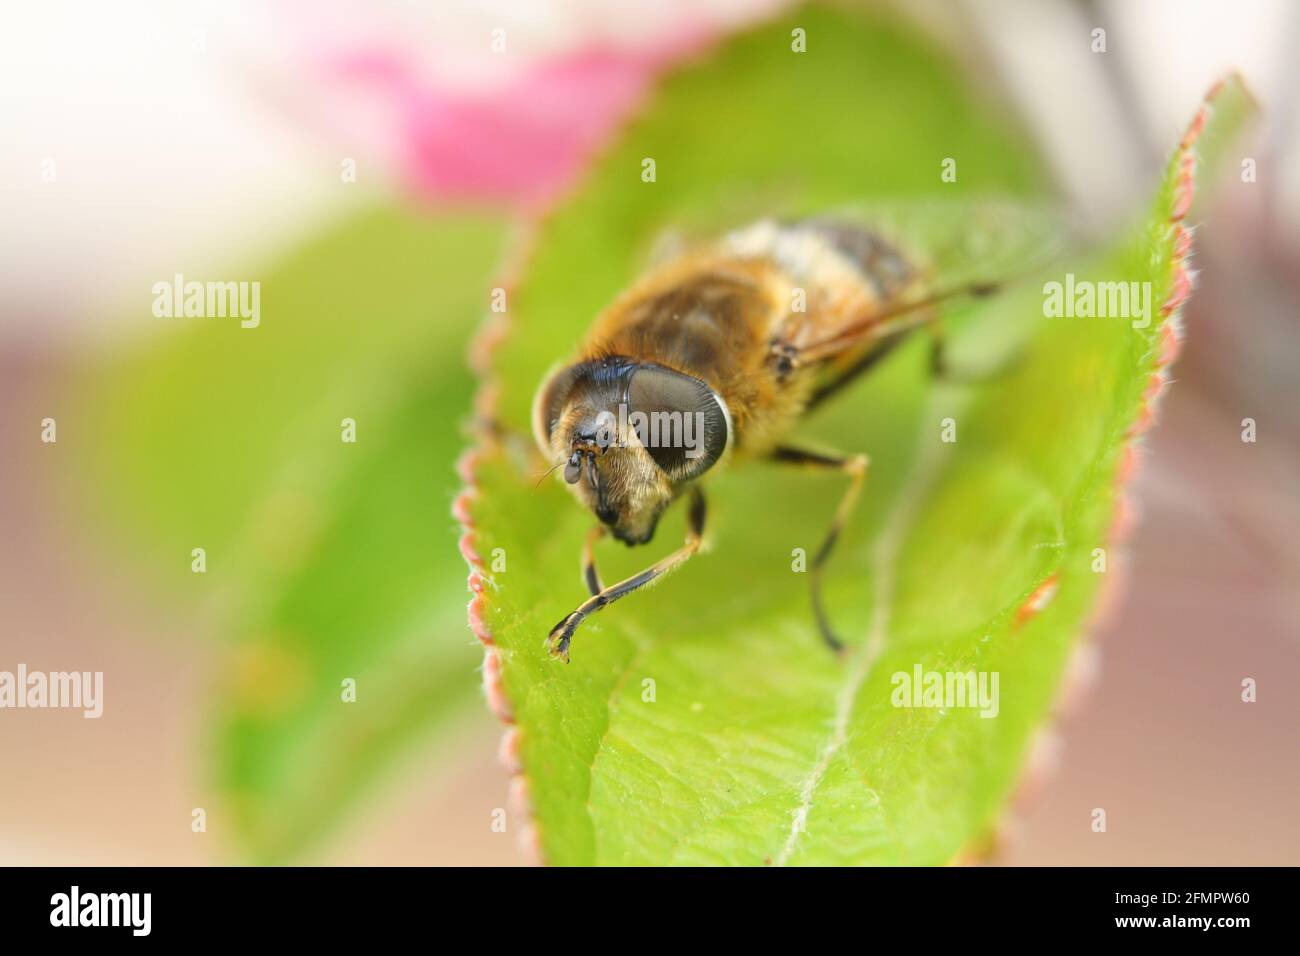 Macro close-up of the face of a common drone fly (eristalis tenax), a type of hover fly that imitates a honey bee. They are important pollinators. Stock Photo